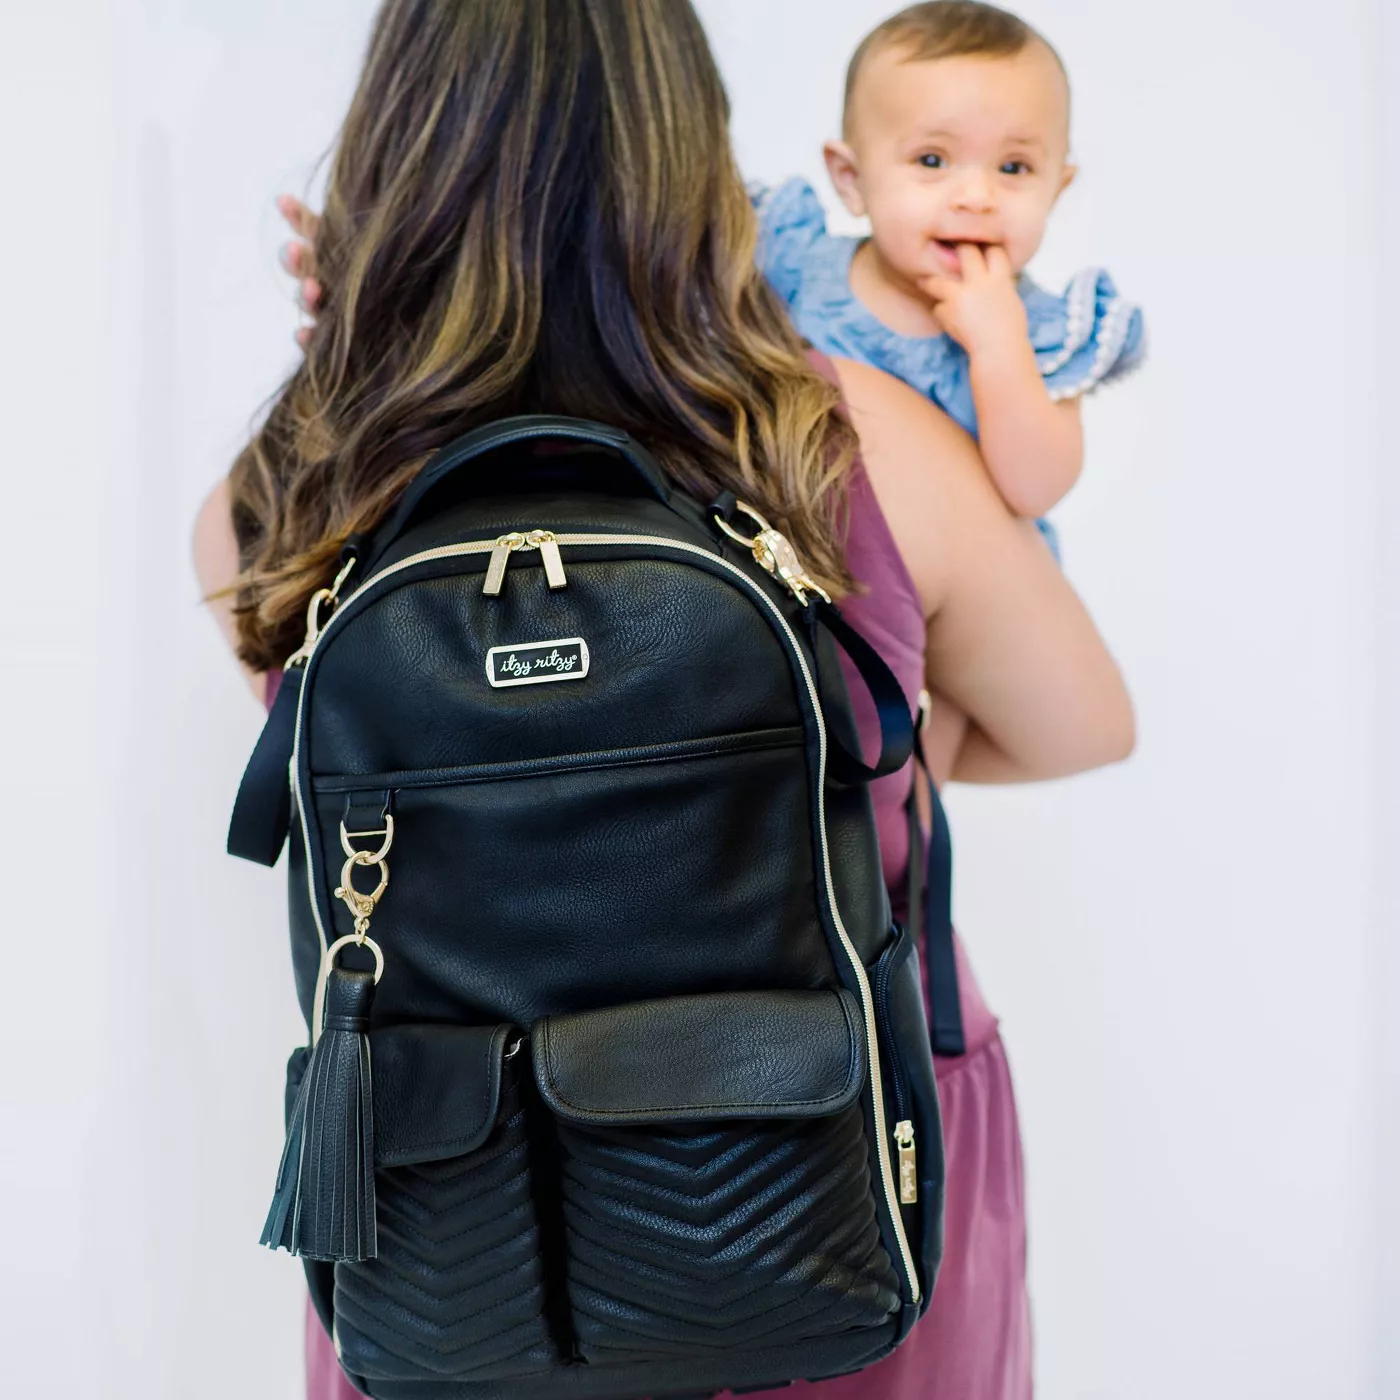 Itzy Ritzy Diaper Bag Backpack – Large Capacity Boss Backpack